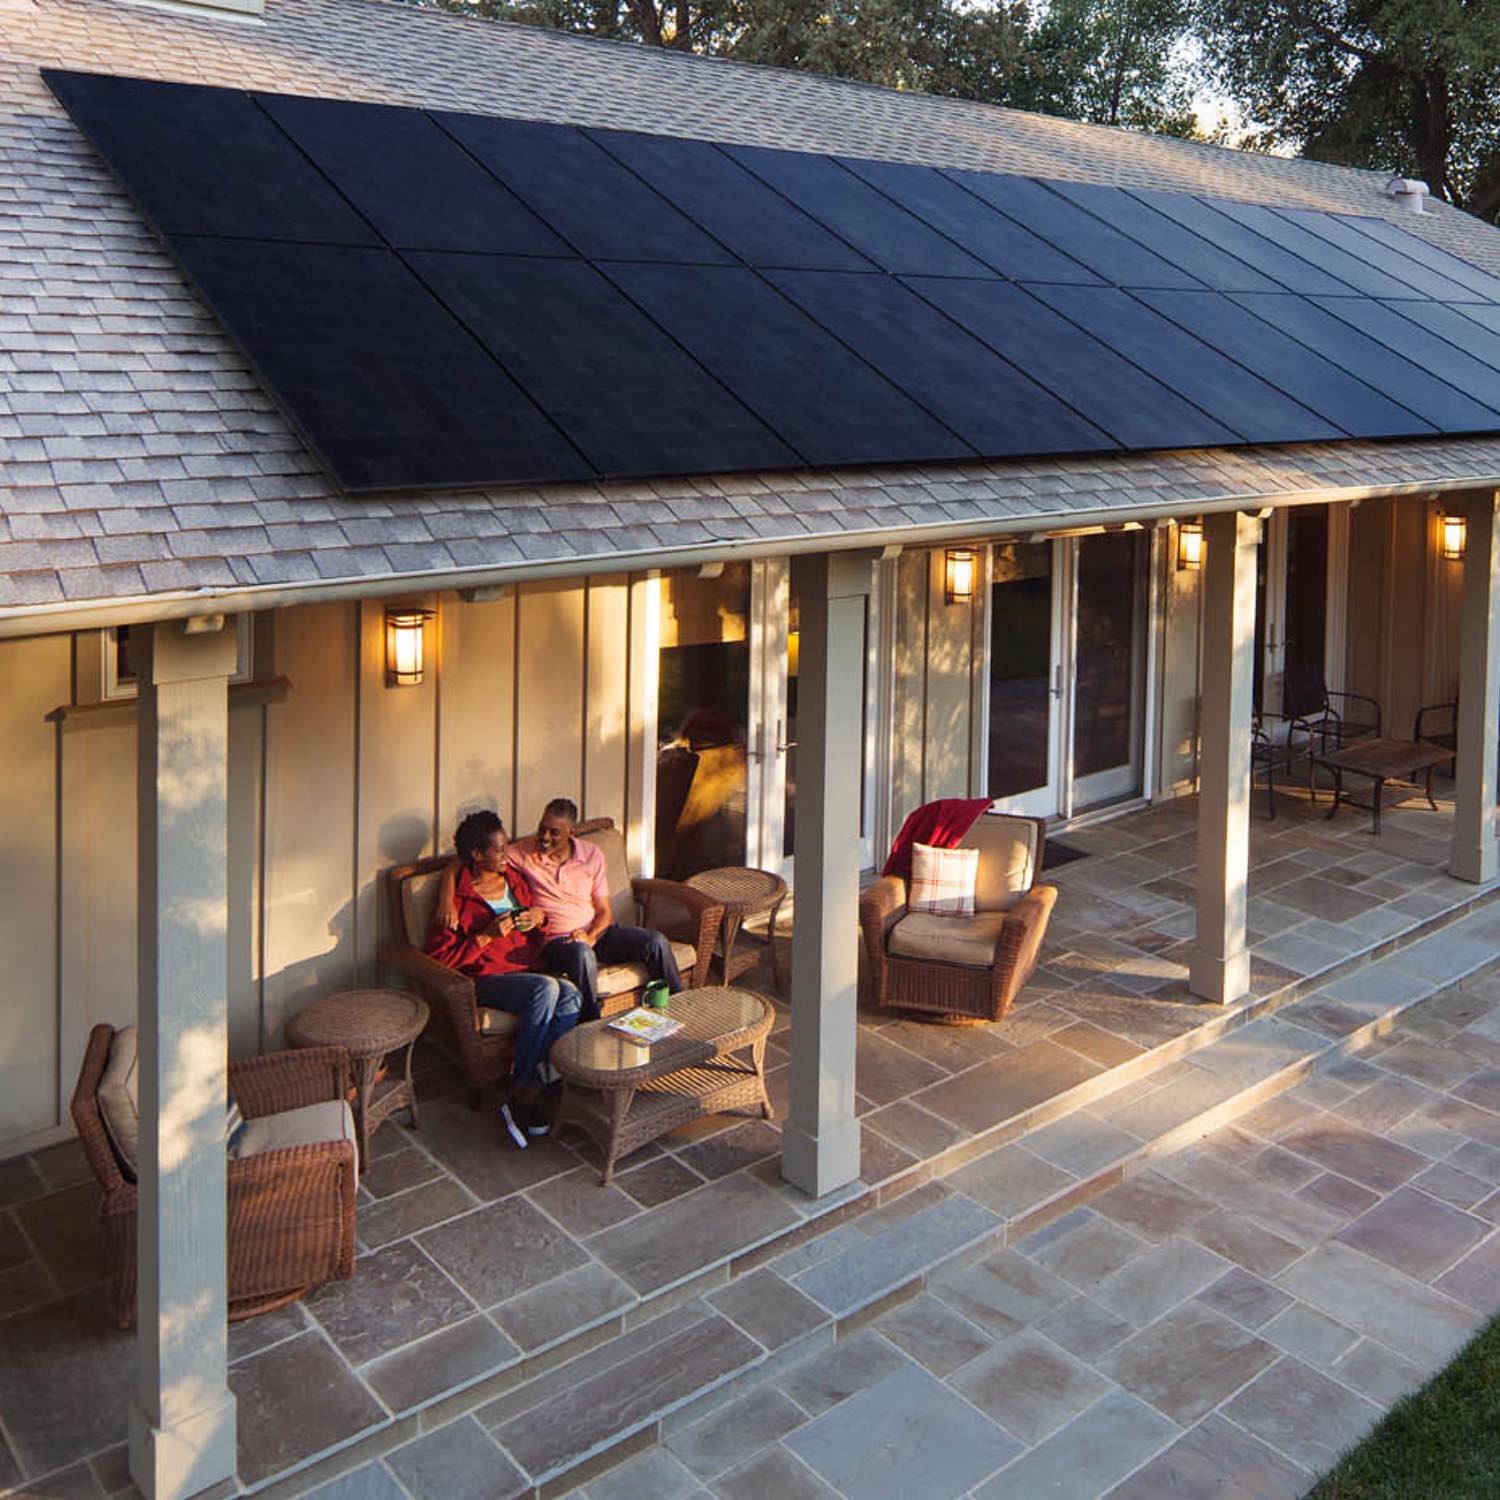 An image of a family enjoying their new solar panels - installation services provided by Solar Energy Partners in South Carolina & Georgia.